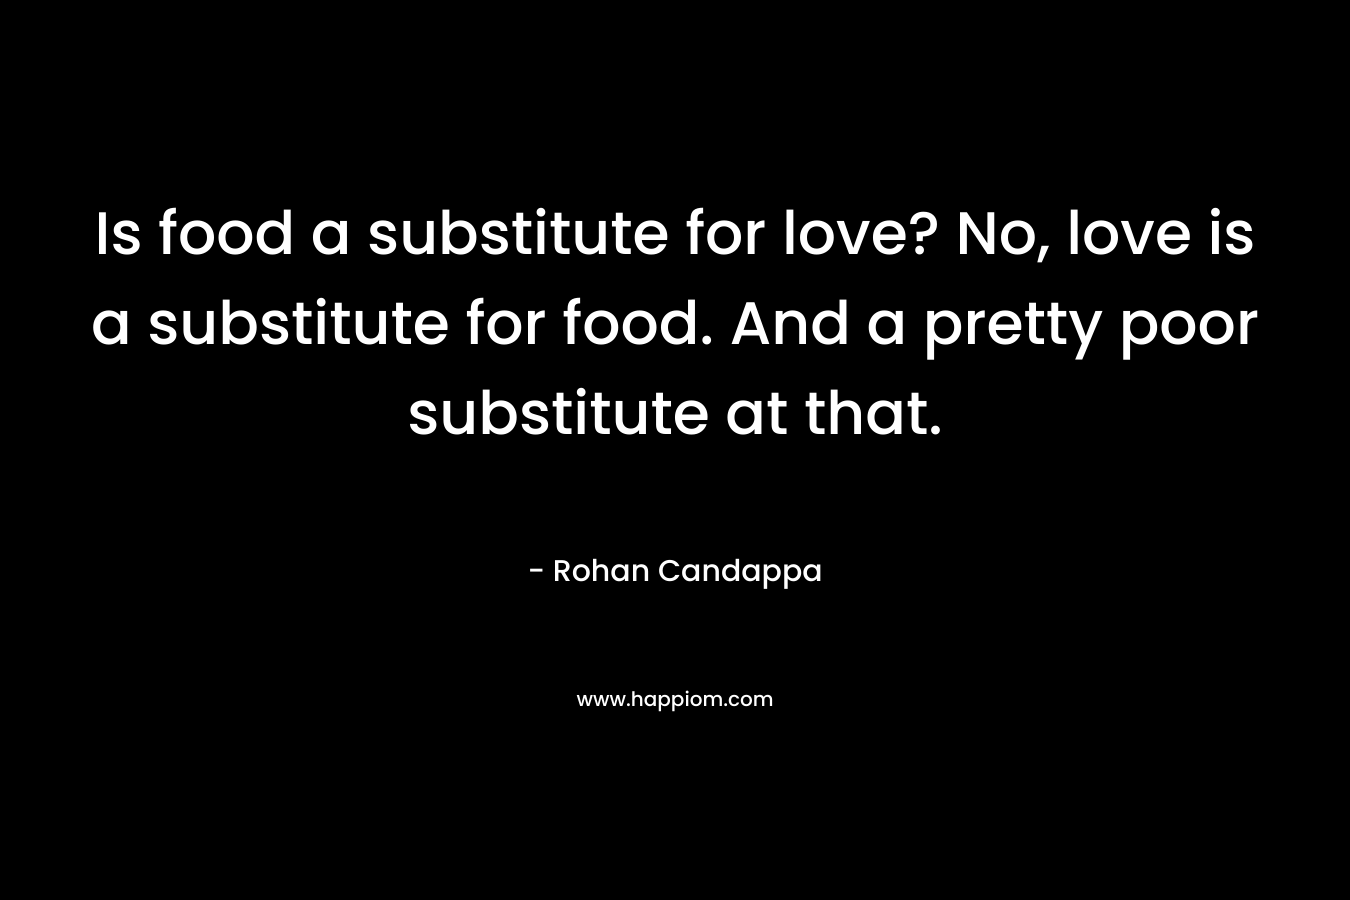 Is food a substitute for love? No, love is a substitute for food. And a pretty poor substitute at that.